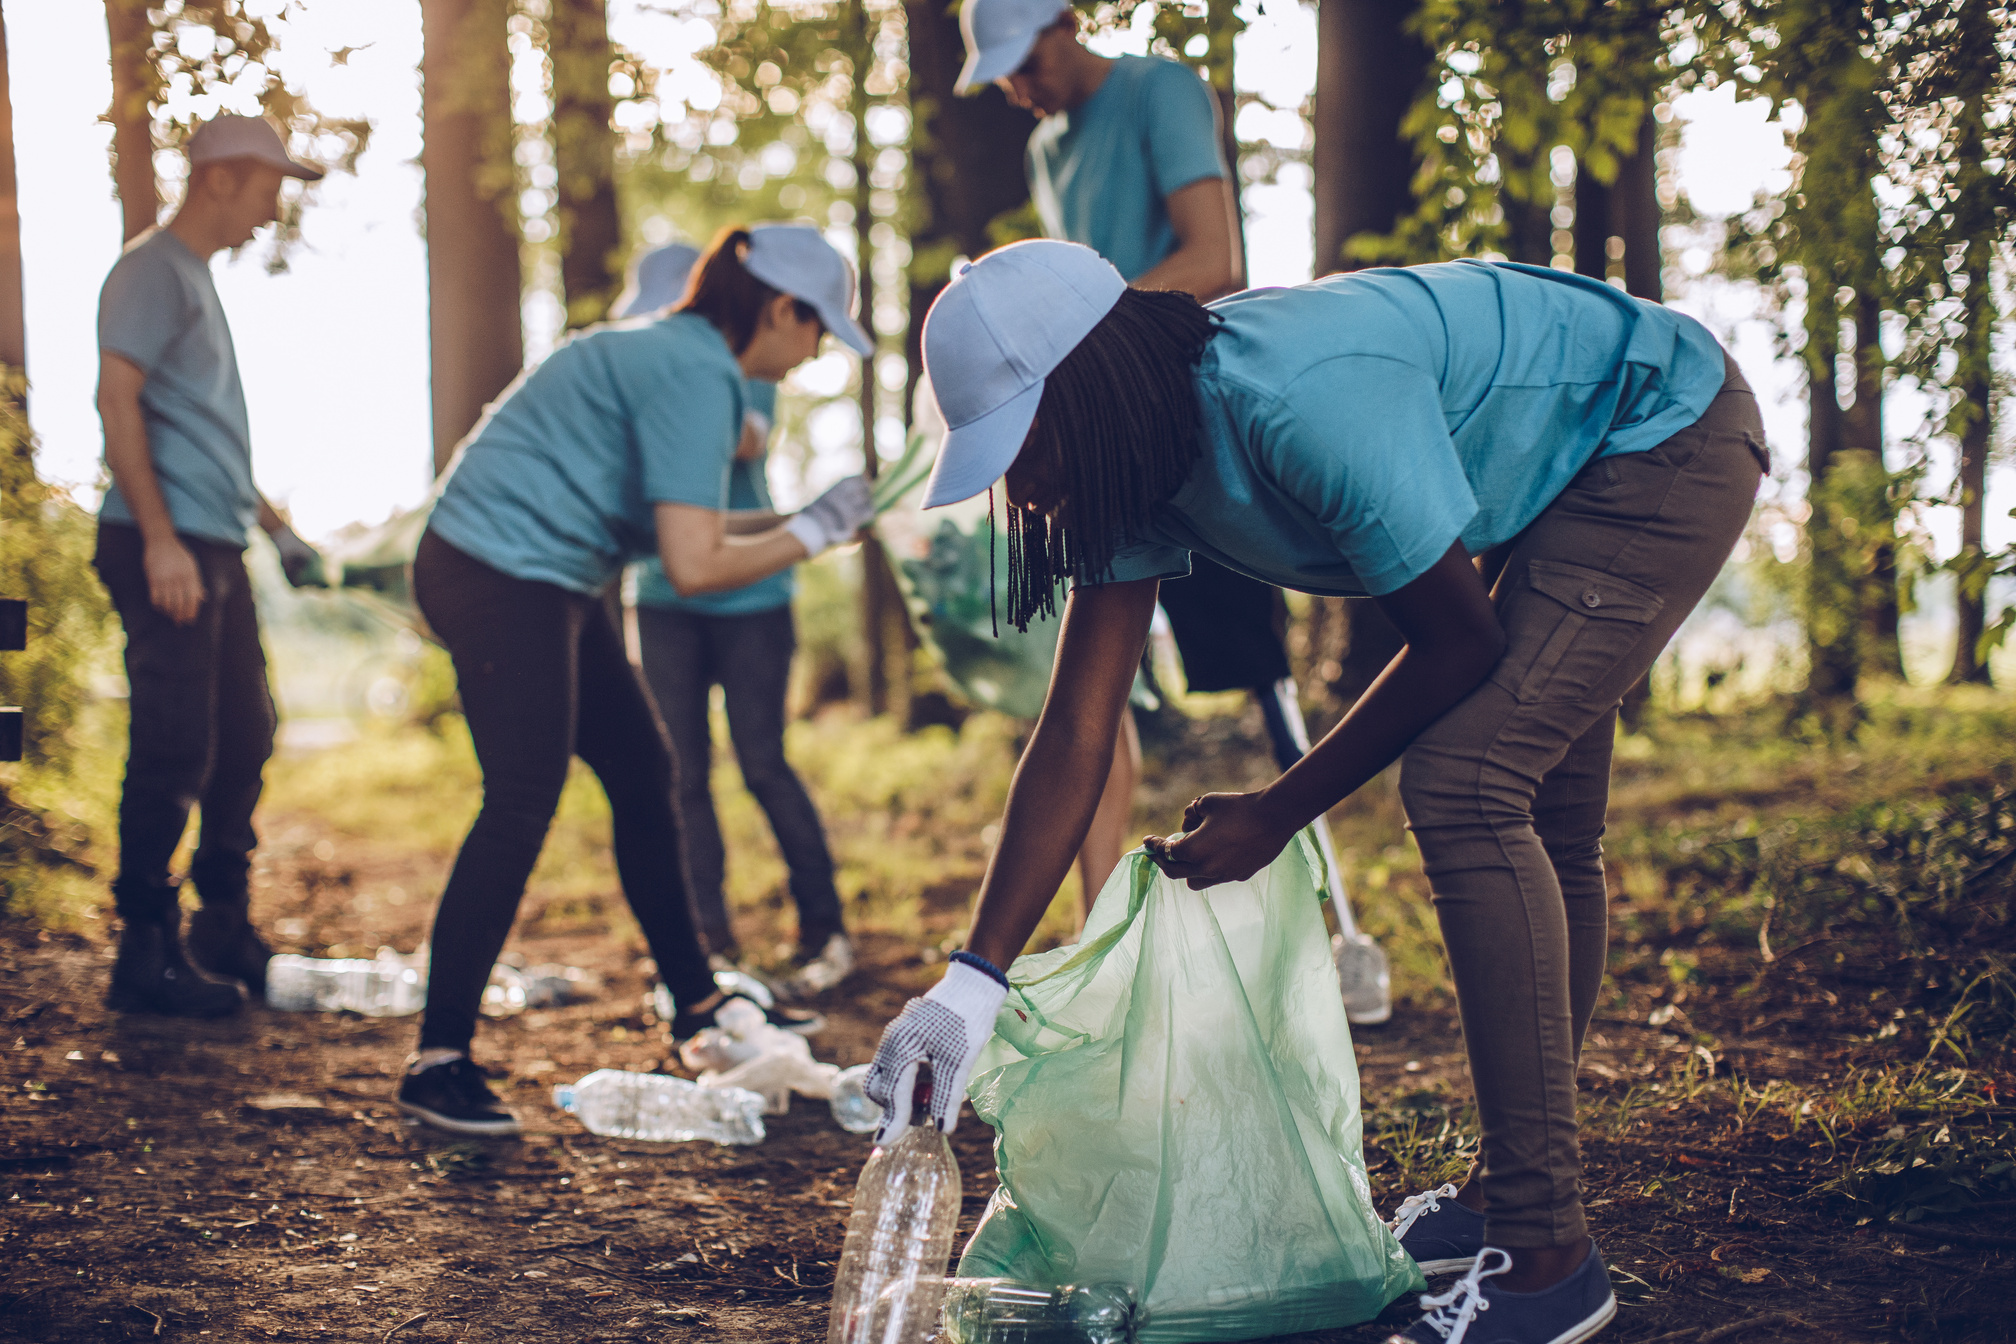 Group of community volunteers cleaning up trash in public park